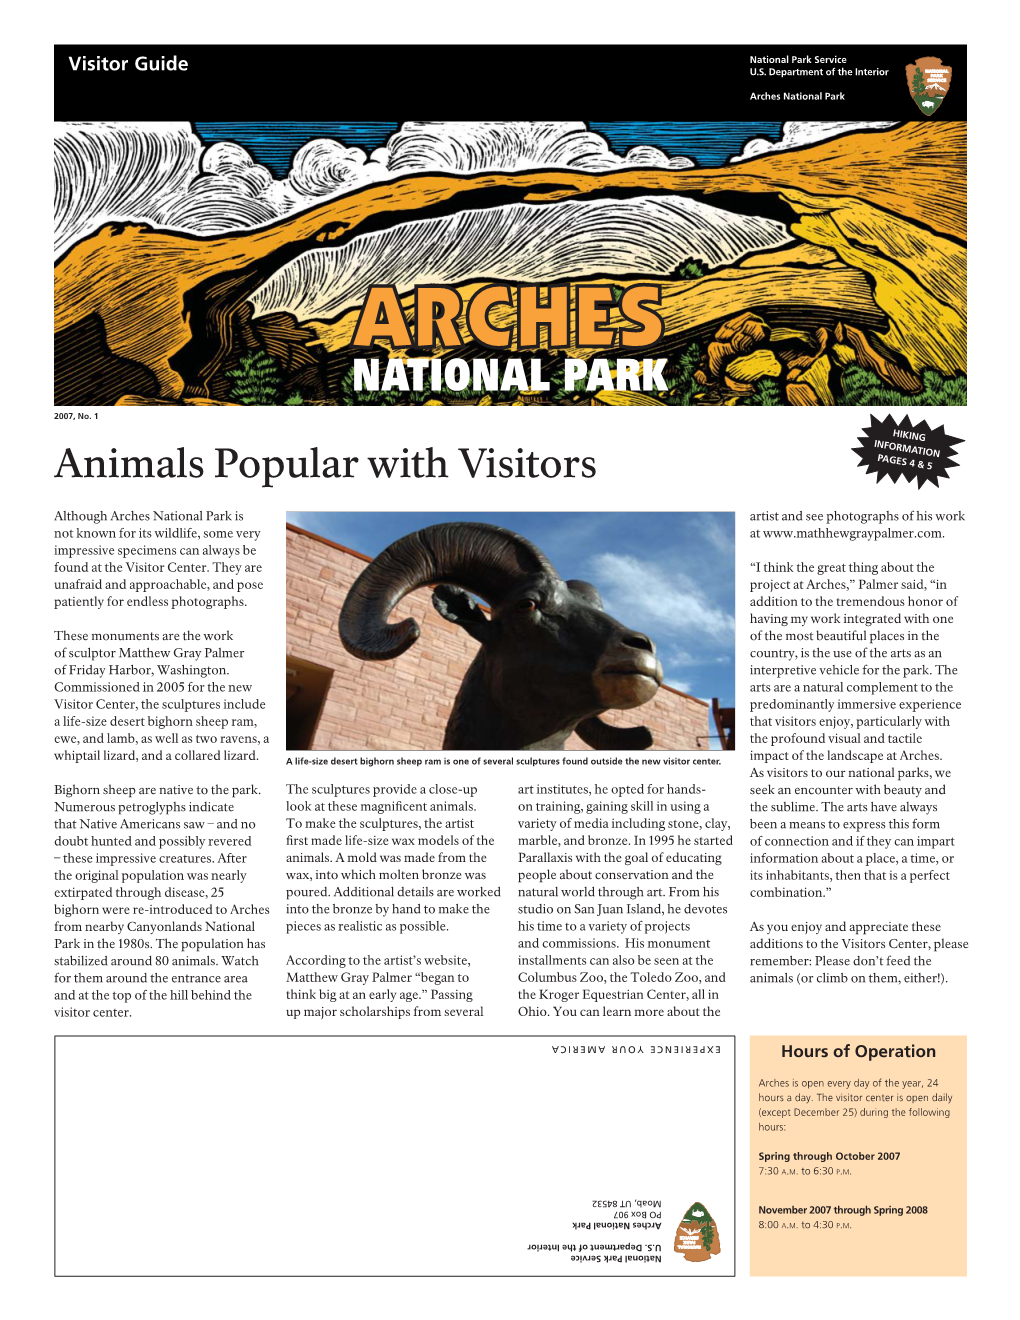 Animals Popular with Visitors PAGES 4 & 5